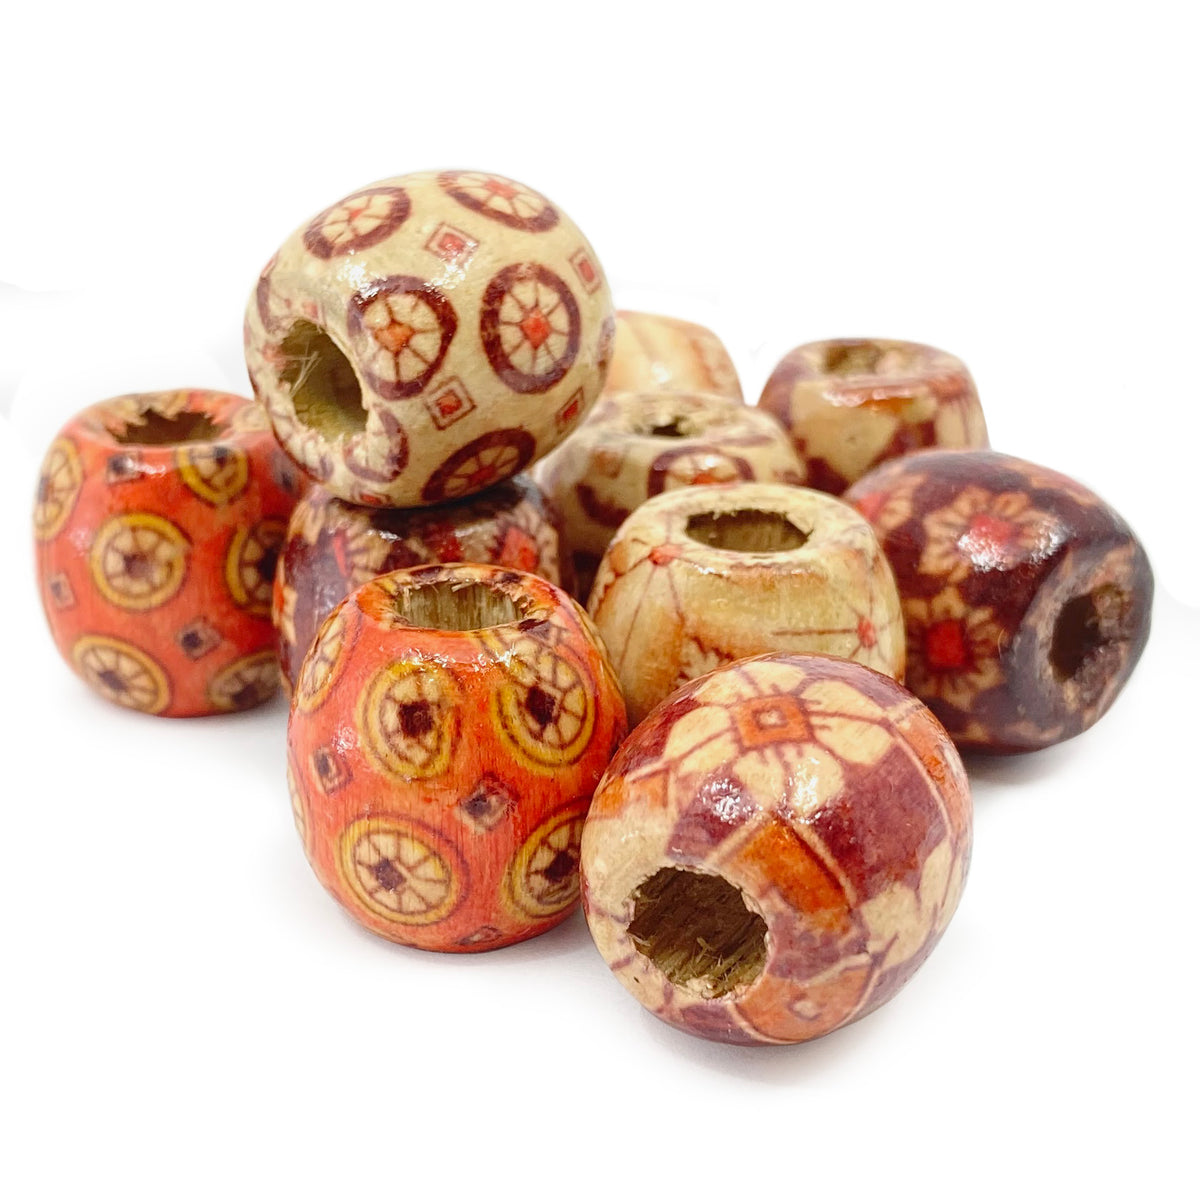 RHBLME 400pcs 15mm Wooden Beads, 200pcs Natural Unfinished Round Wood Beads for Crafts with Holes, 200pcs Painted Star Shape Wood Beads for Craft